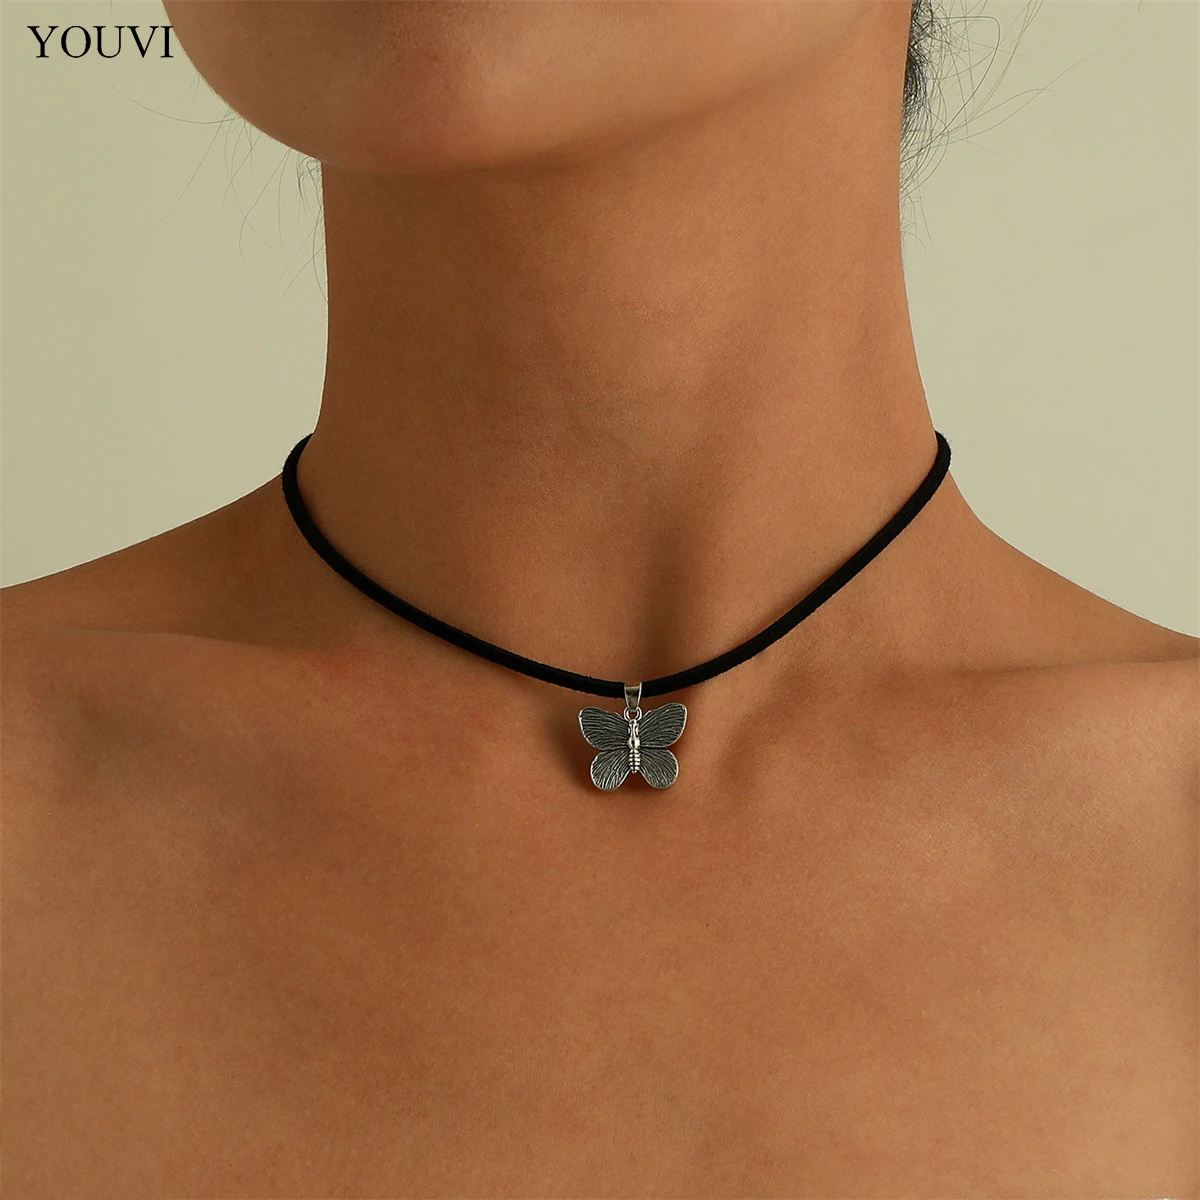 

YOUVI Simple Black Sexy Flannel Short Choker Necklace for Women Goth Butterfly Pedant Necklace Jewelry Chains on the Neck